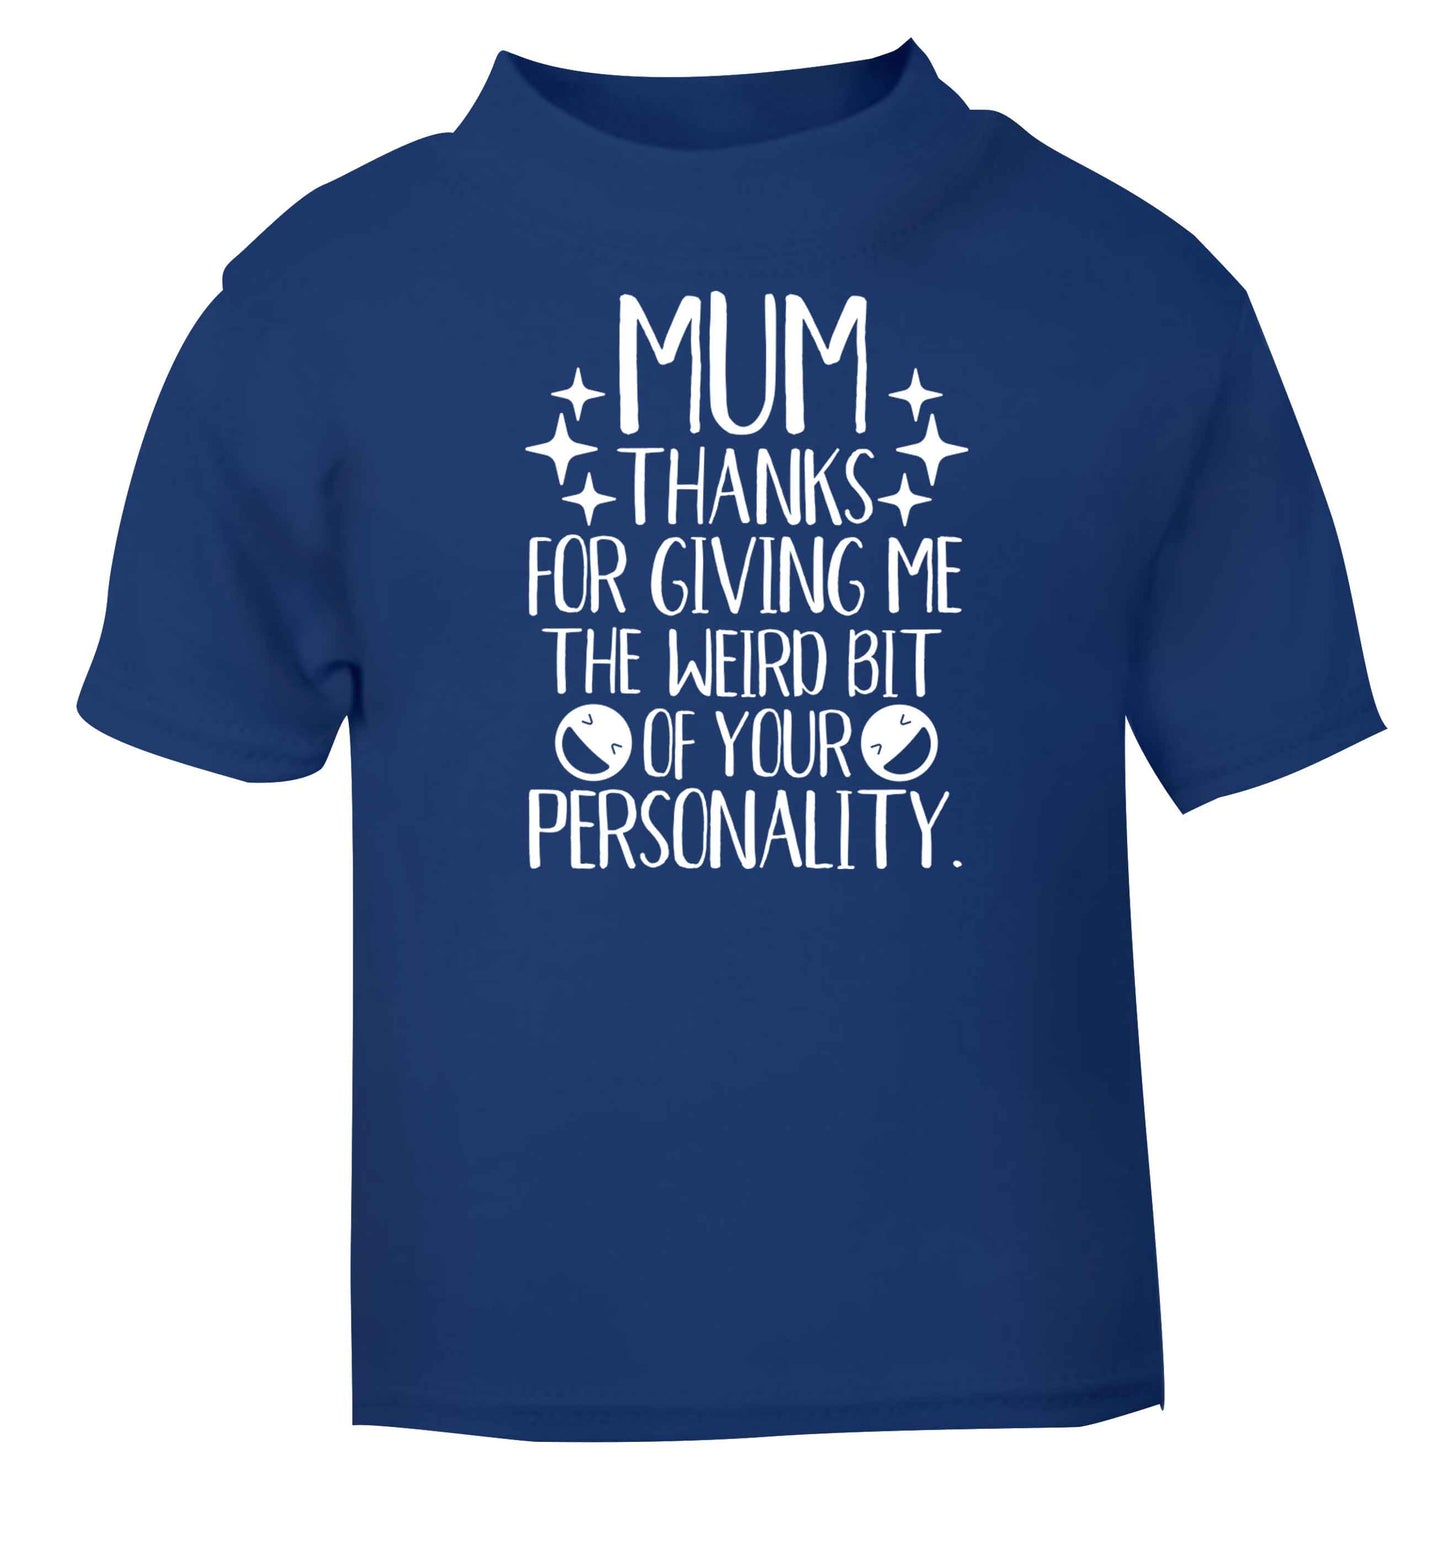 Mum thanks for giving me the weird bit of your personality blue baby toddler Tshirt 2 Years